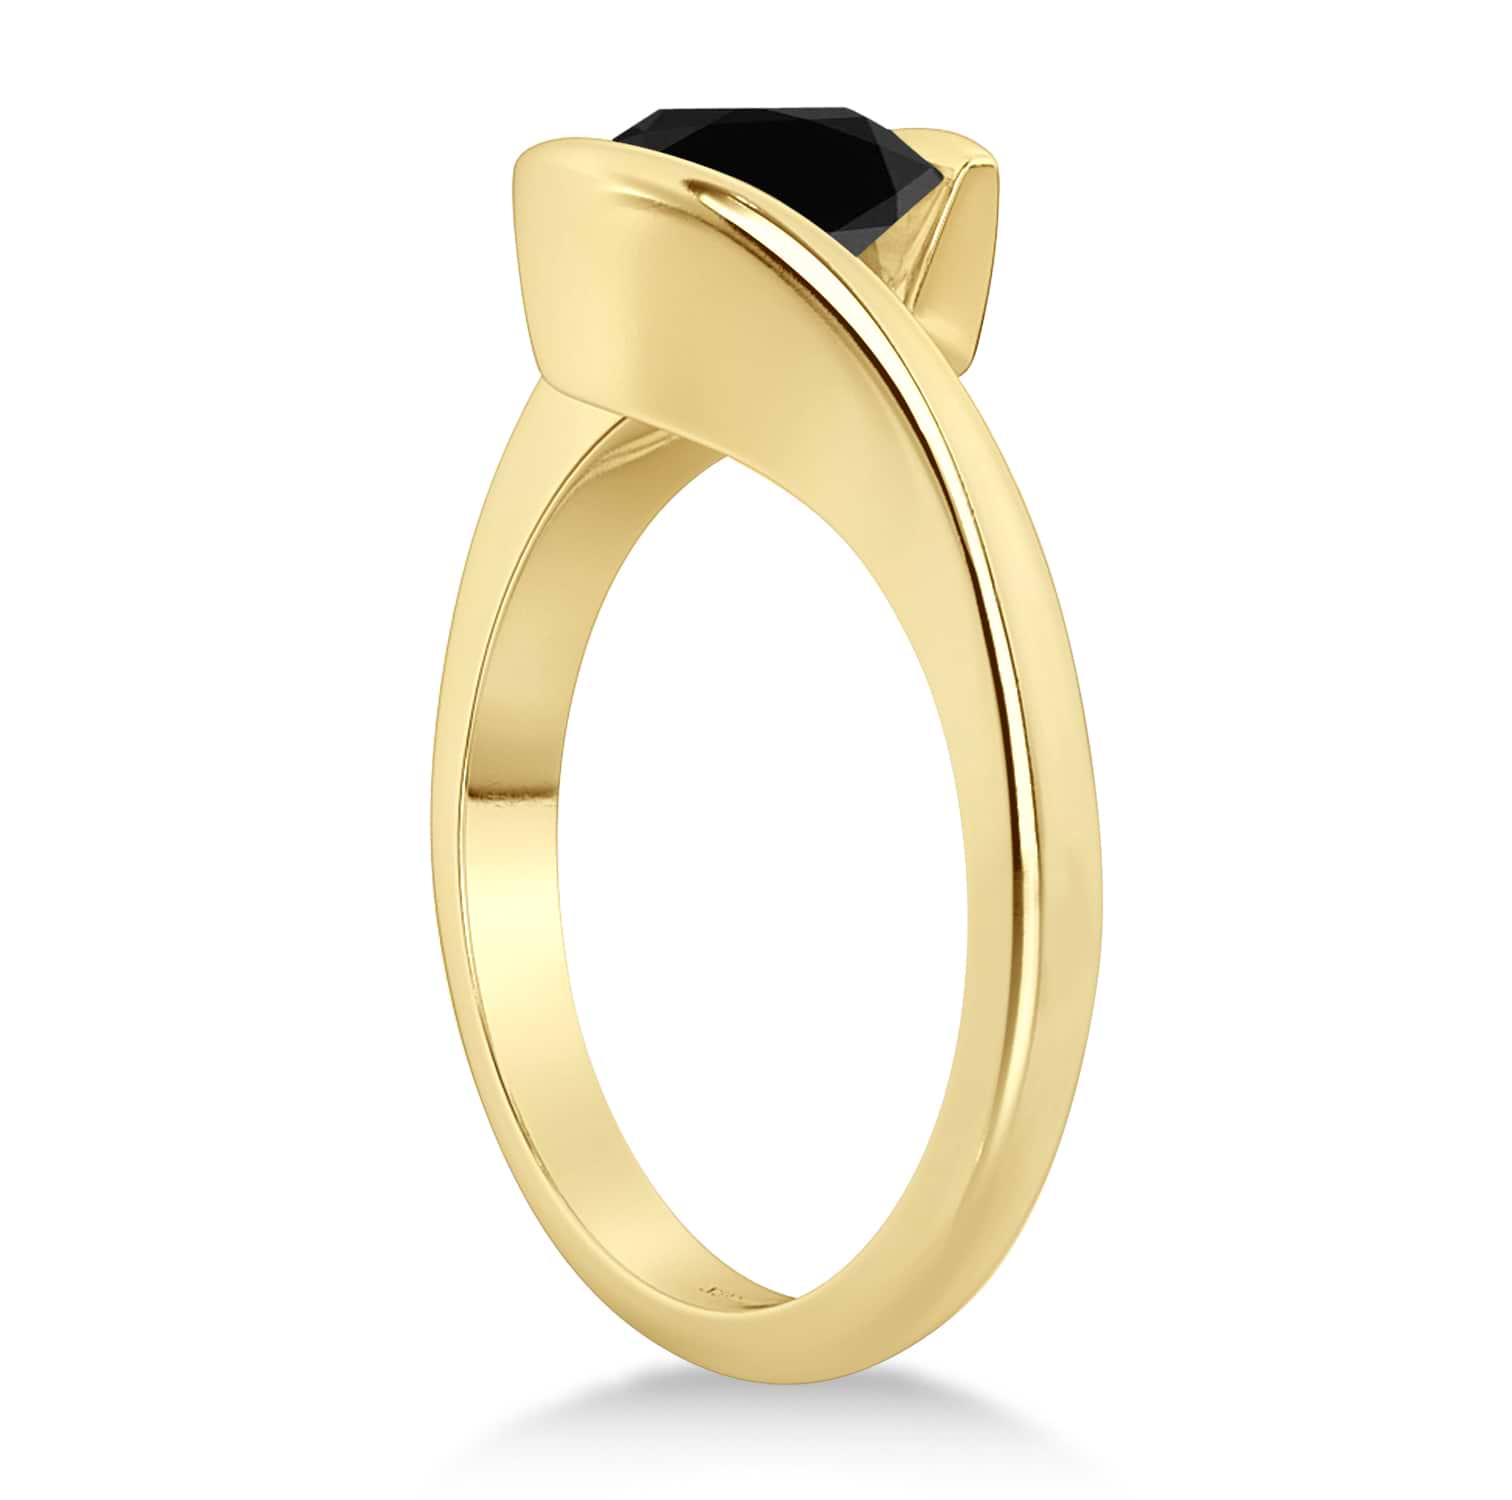 Tension Set Solitaire Black Diamond Engagement Ring 14k Yellow Gold 1.00ct